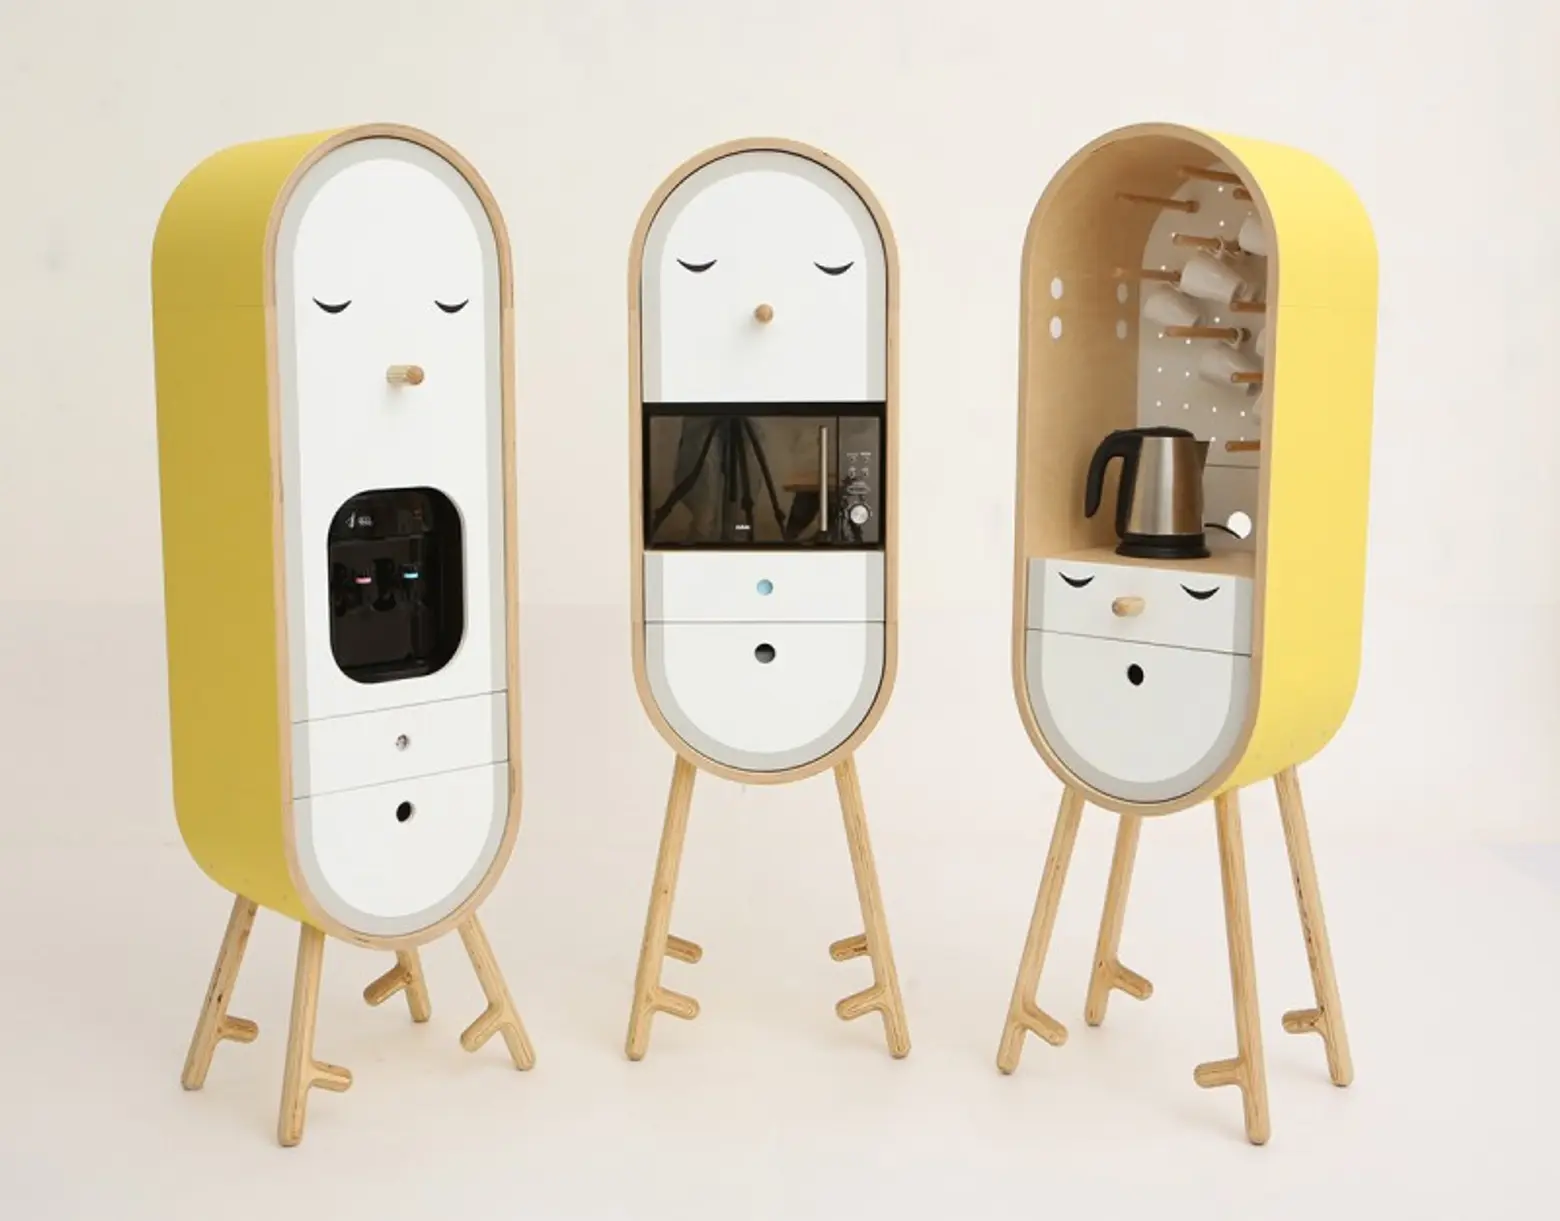 Meet LO-LO, a Capsular Microkitchen for the Home or Office